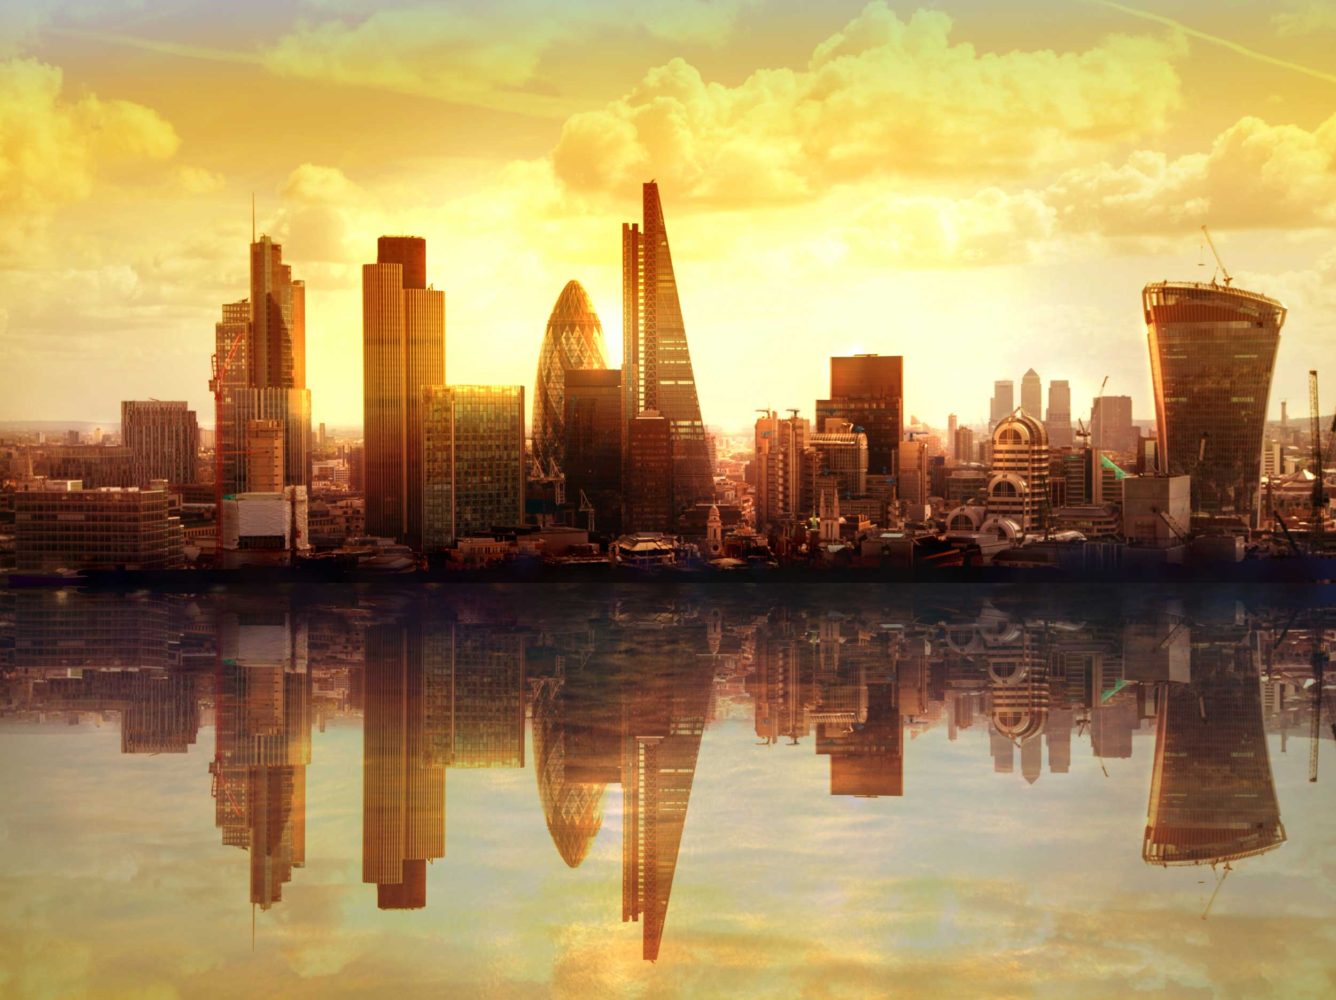 London Business District skyline in a bright yellow sunset